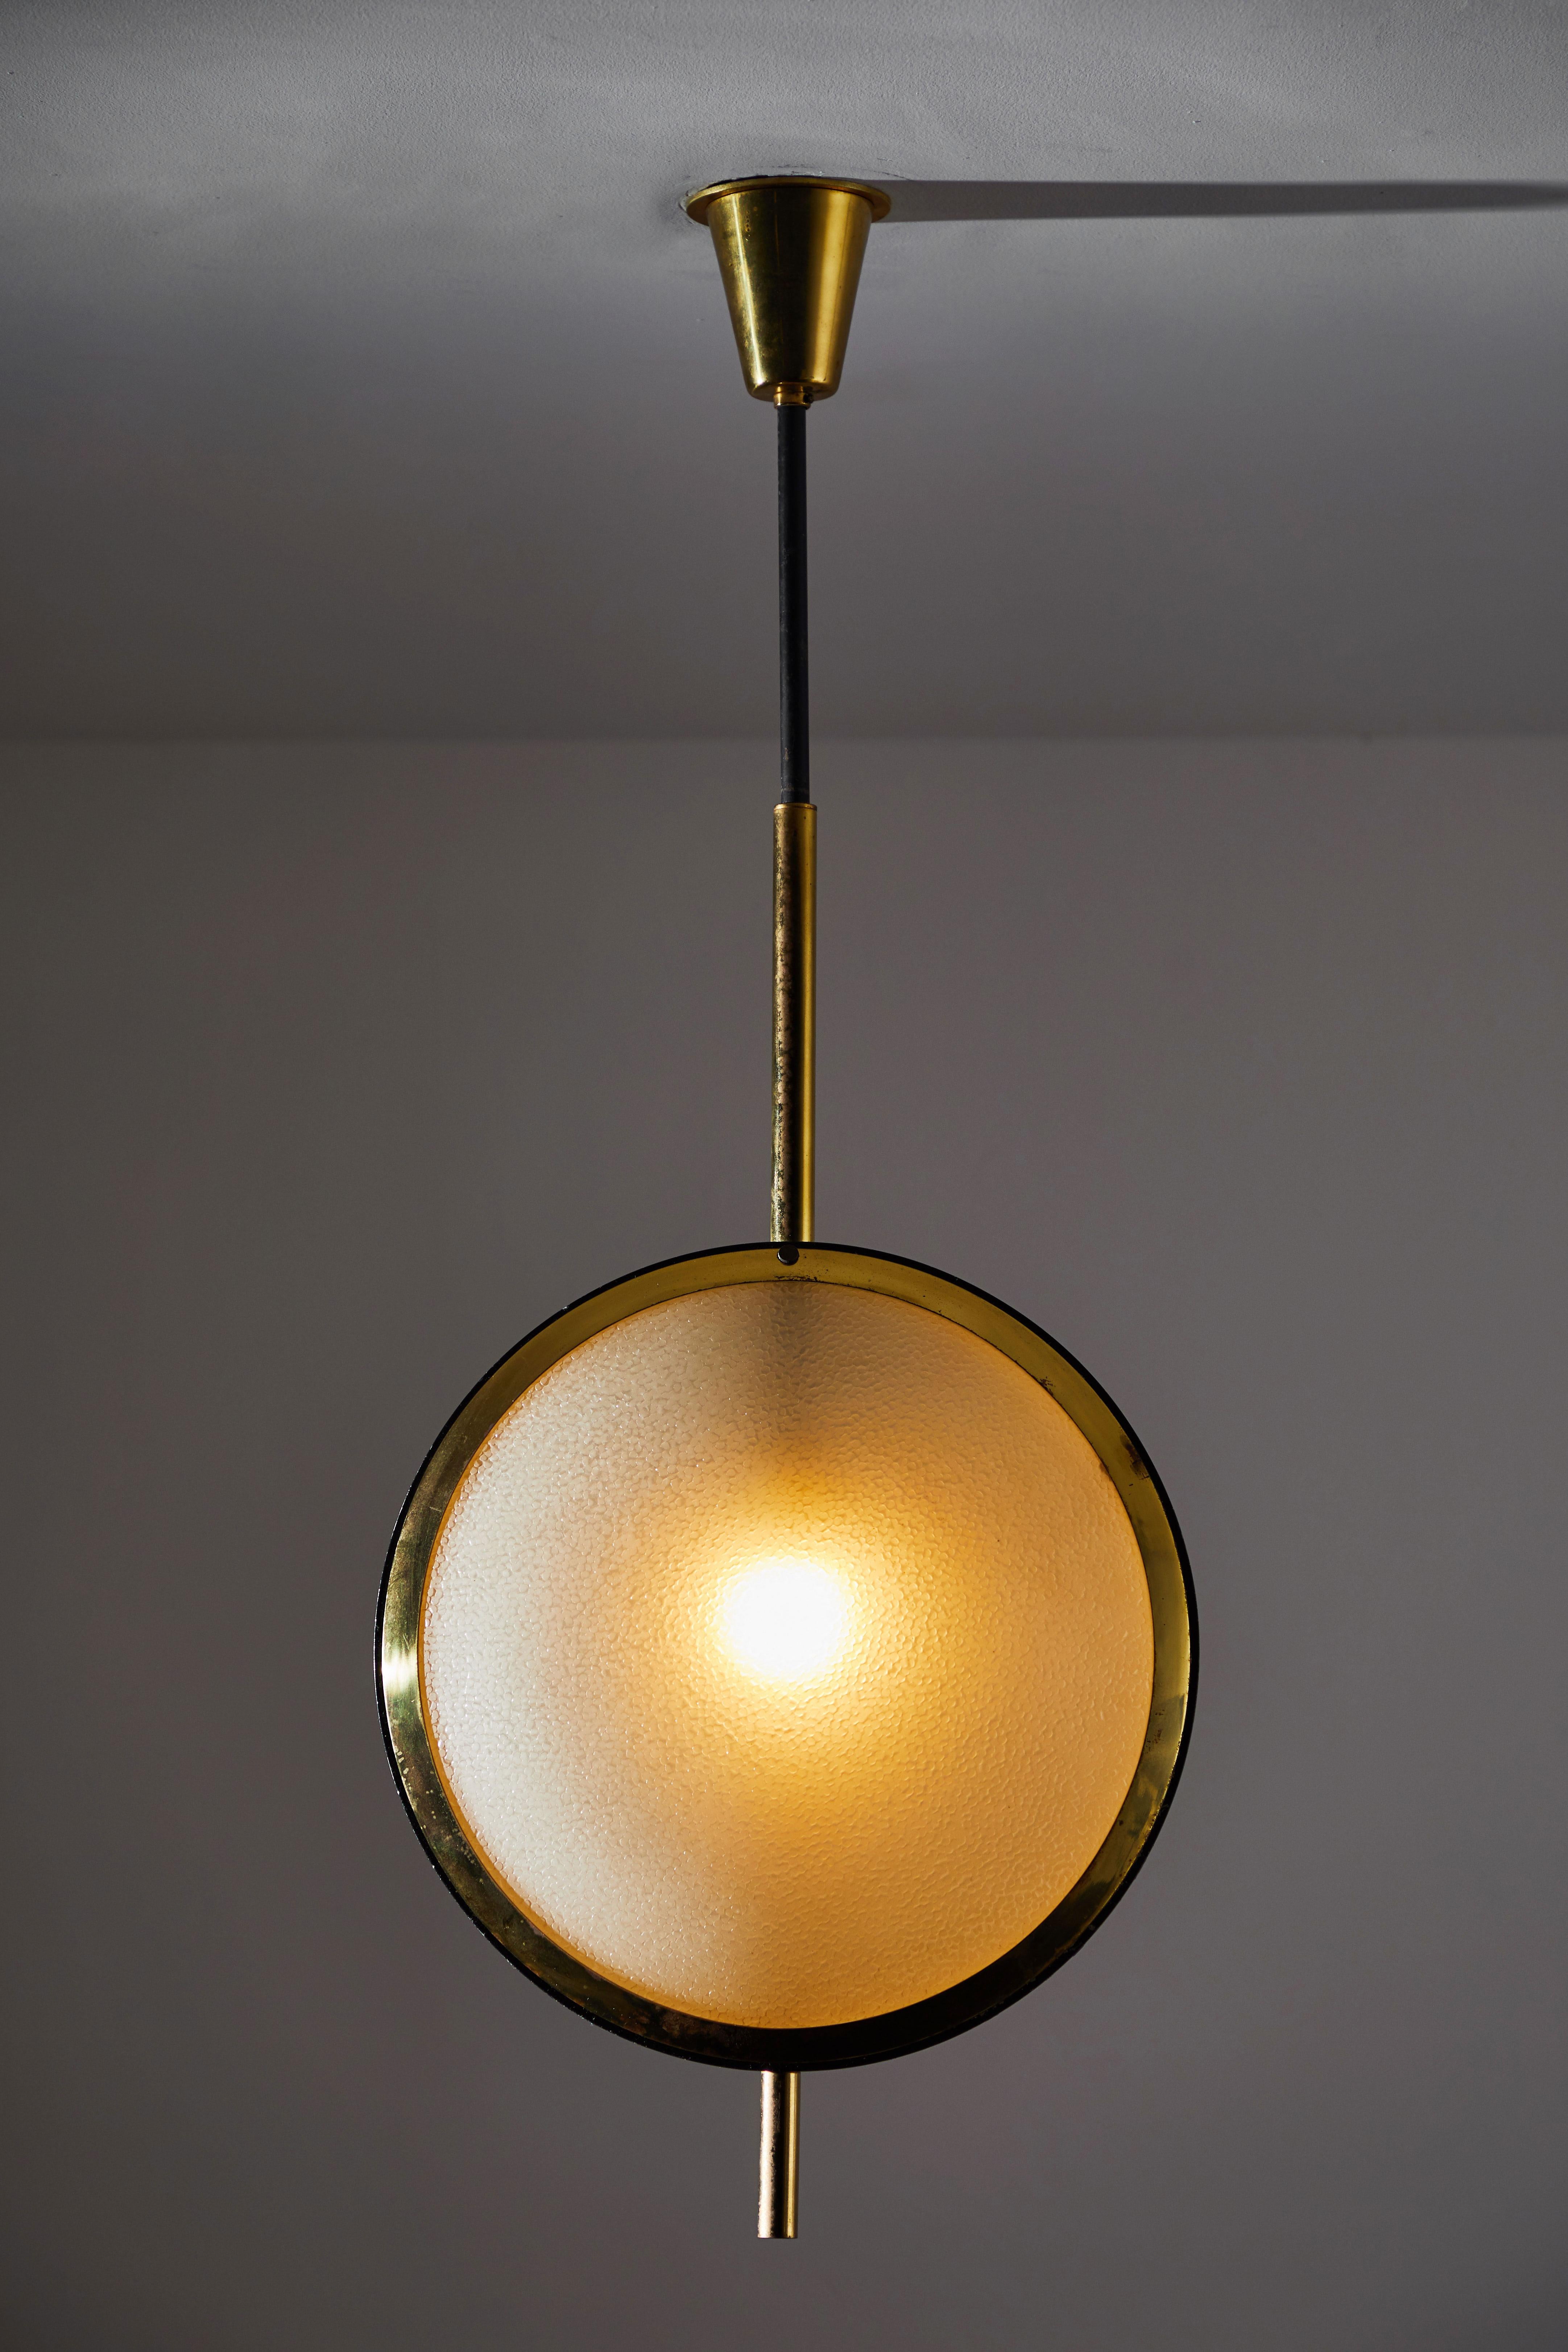 Two rare Stilnovo pendants. Manufactured in Italy, circa 1950s. Brass and textured glass. Rewired for US junction boxes. Original canopy with custom backplate. Each light takes one E26 60w maximum bulb.
TWO AVAILABLE, priced individually